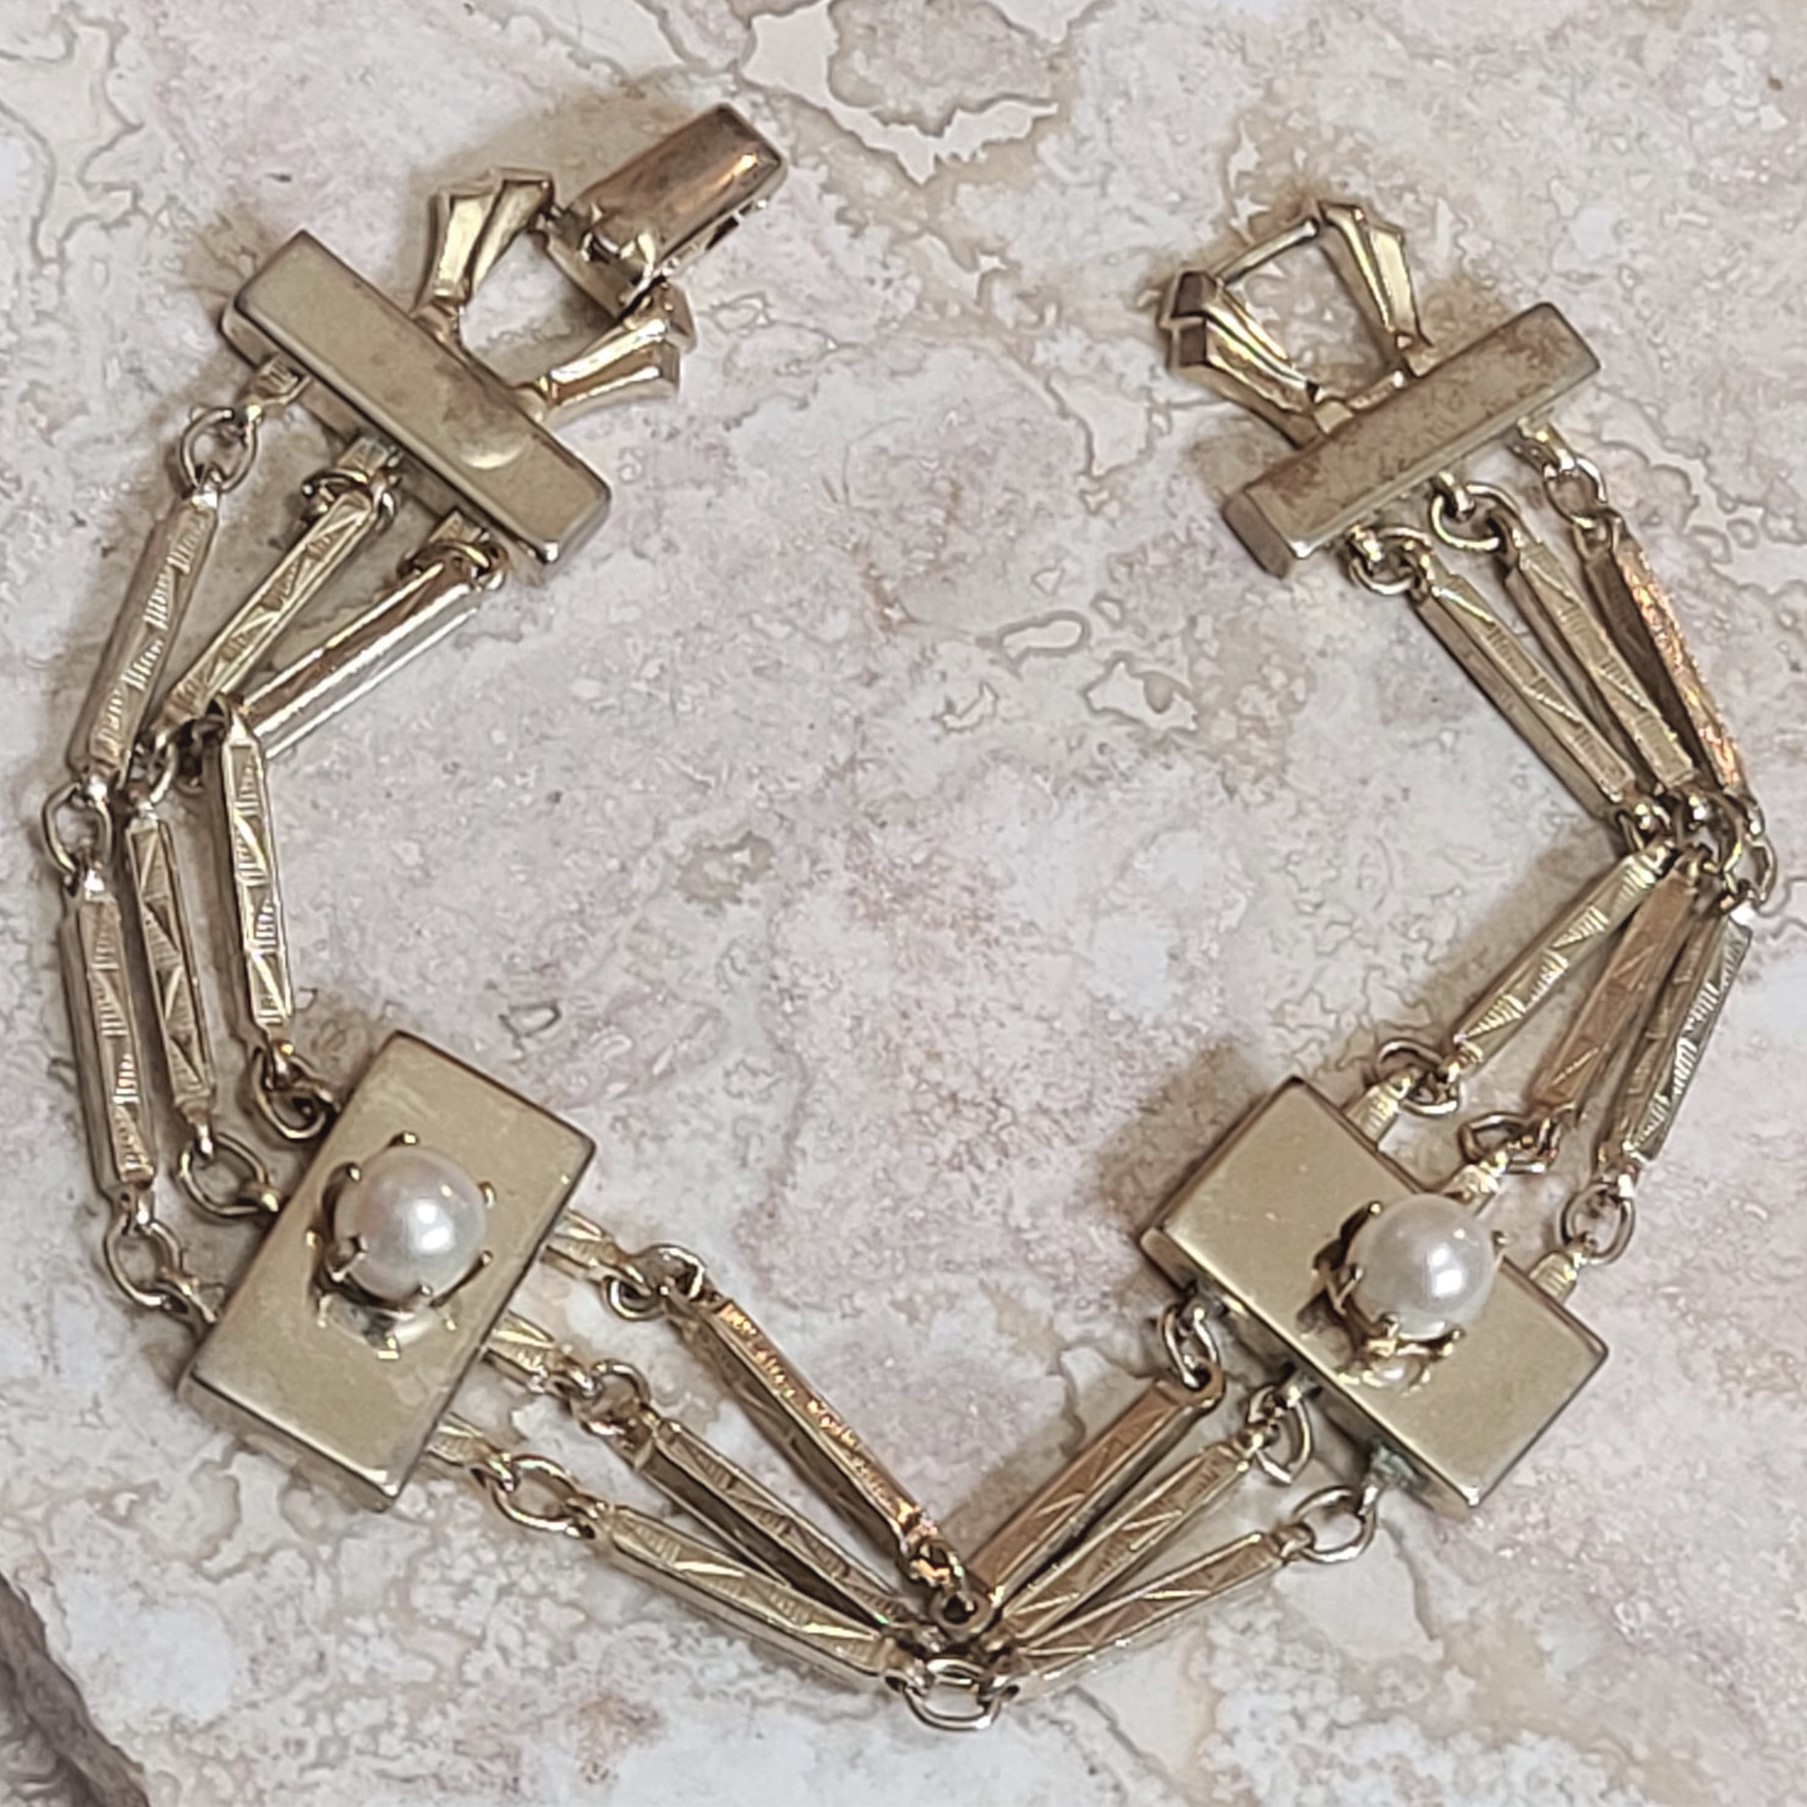 Link goldtone bracelet with pearls pronged setting